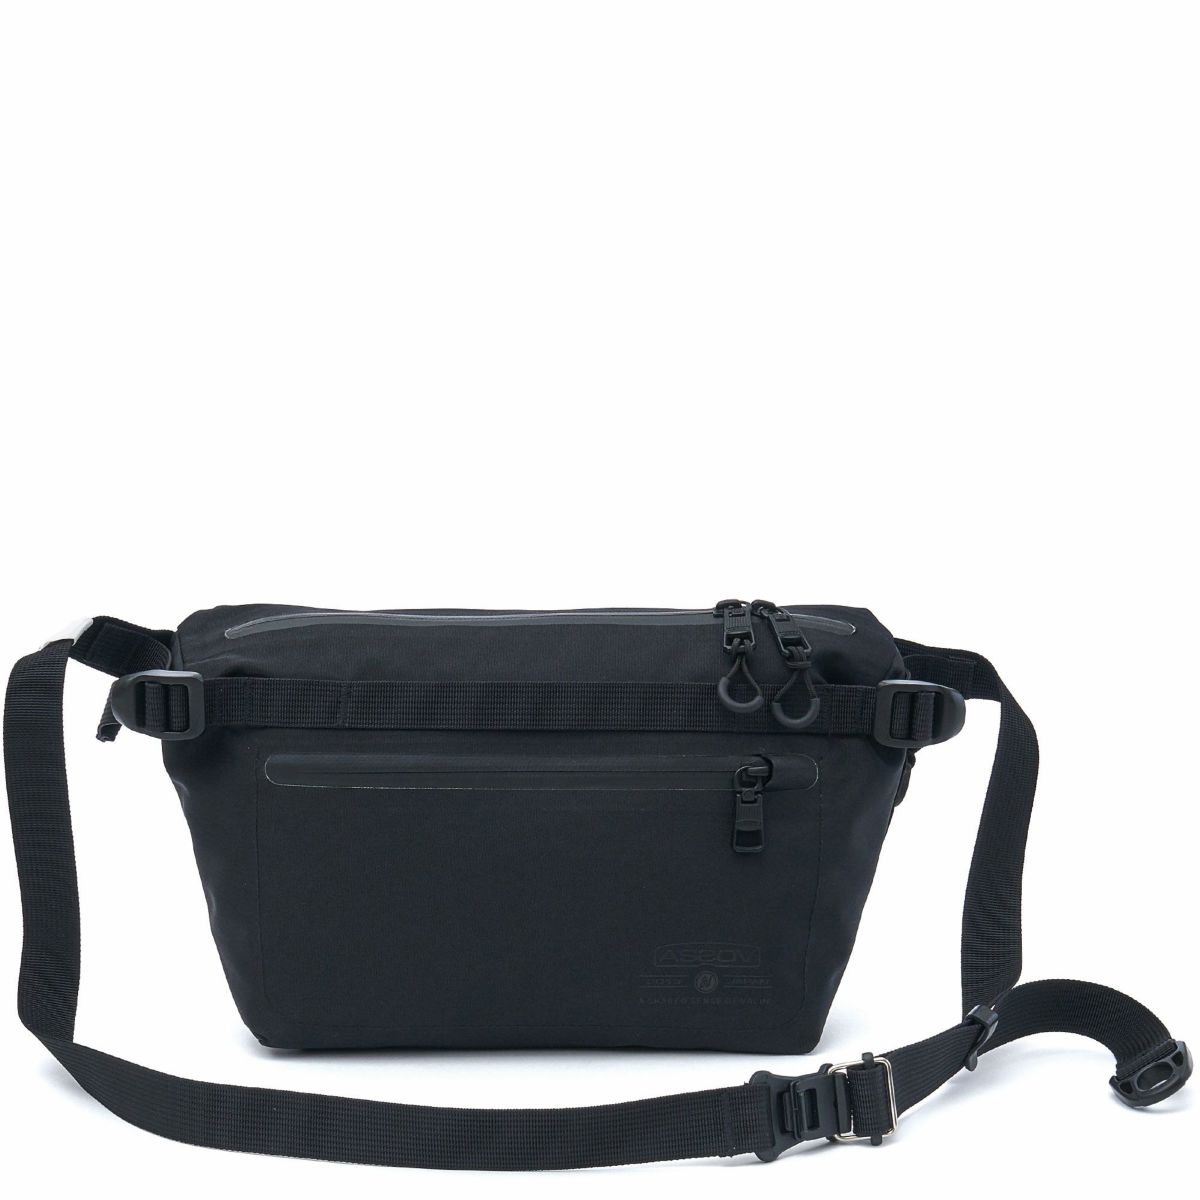 WATER PROOF CORDURA 305D FANNY PACK